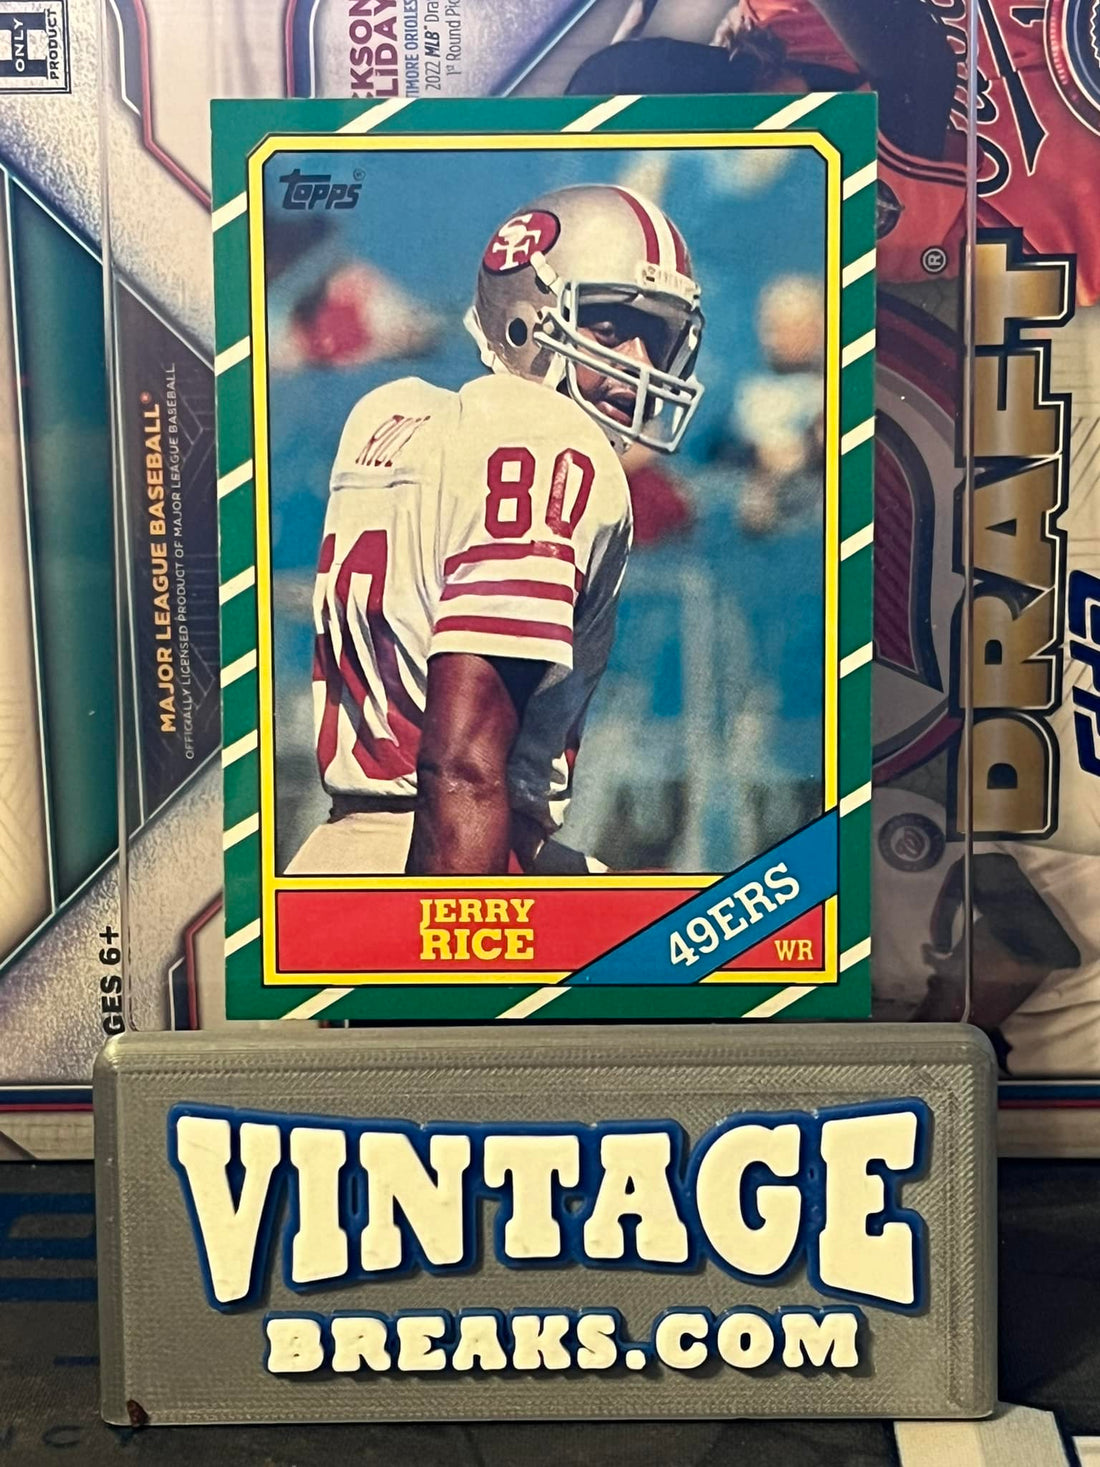 1986 Topps Football Jerry Rice Rookie Card Pulled by Vintage Breaks